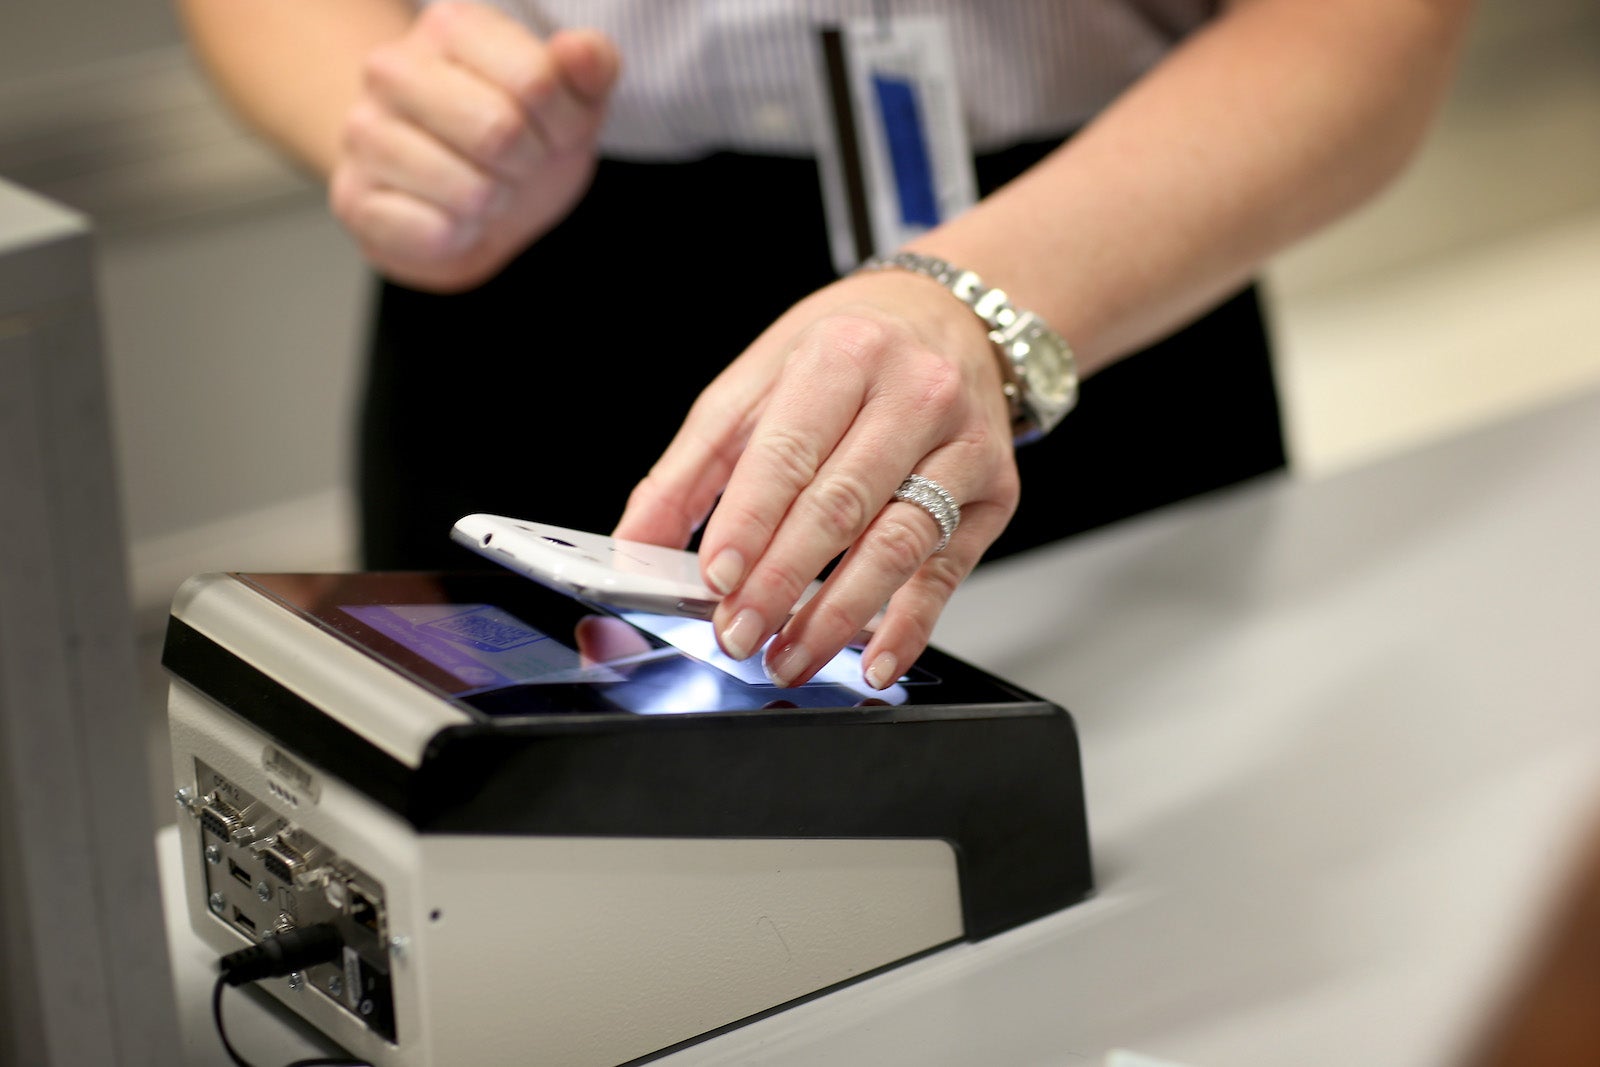 CBP Demonstrates New App For Expedited Passport Control And Customs Screening